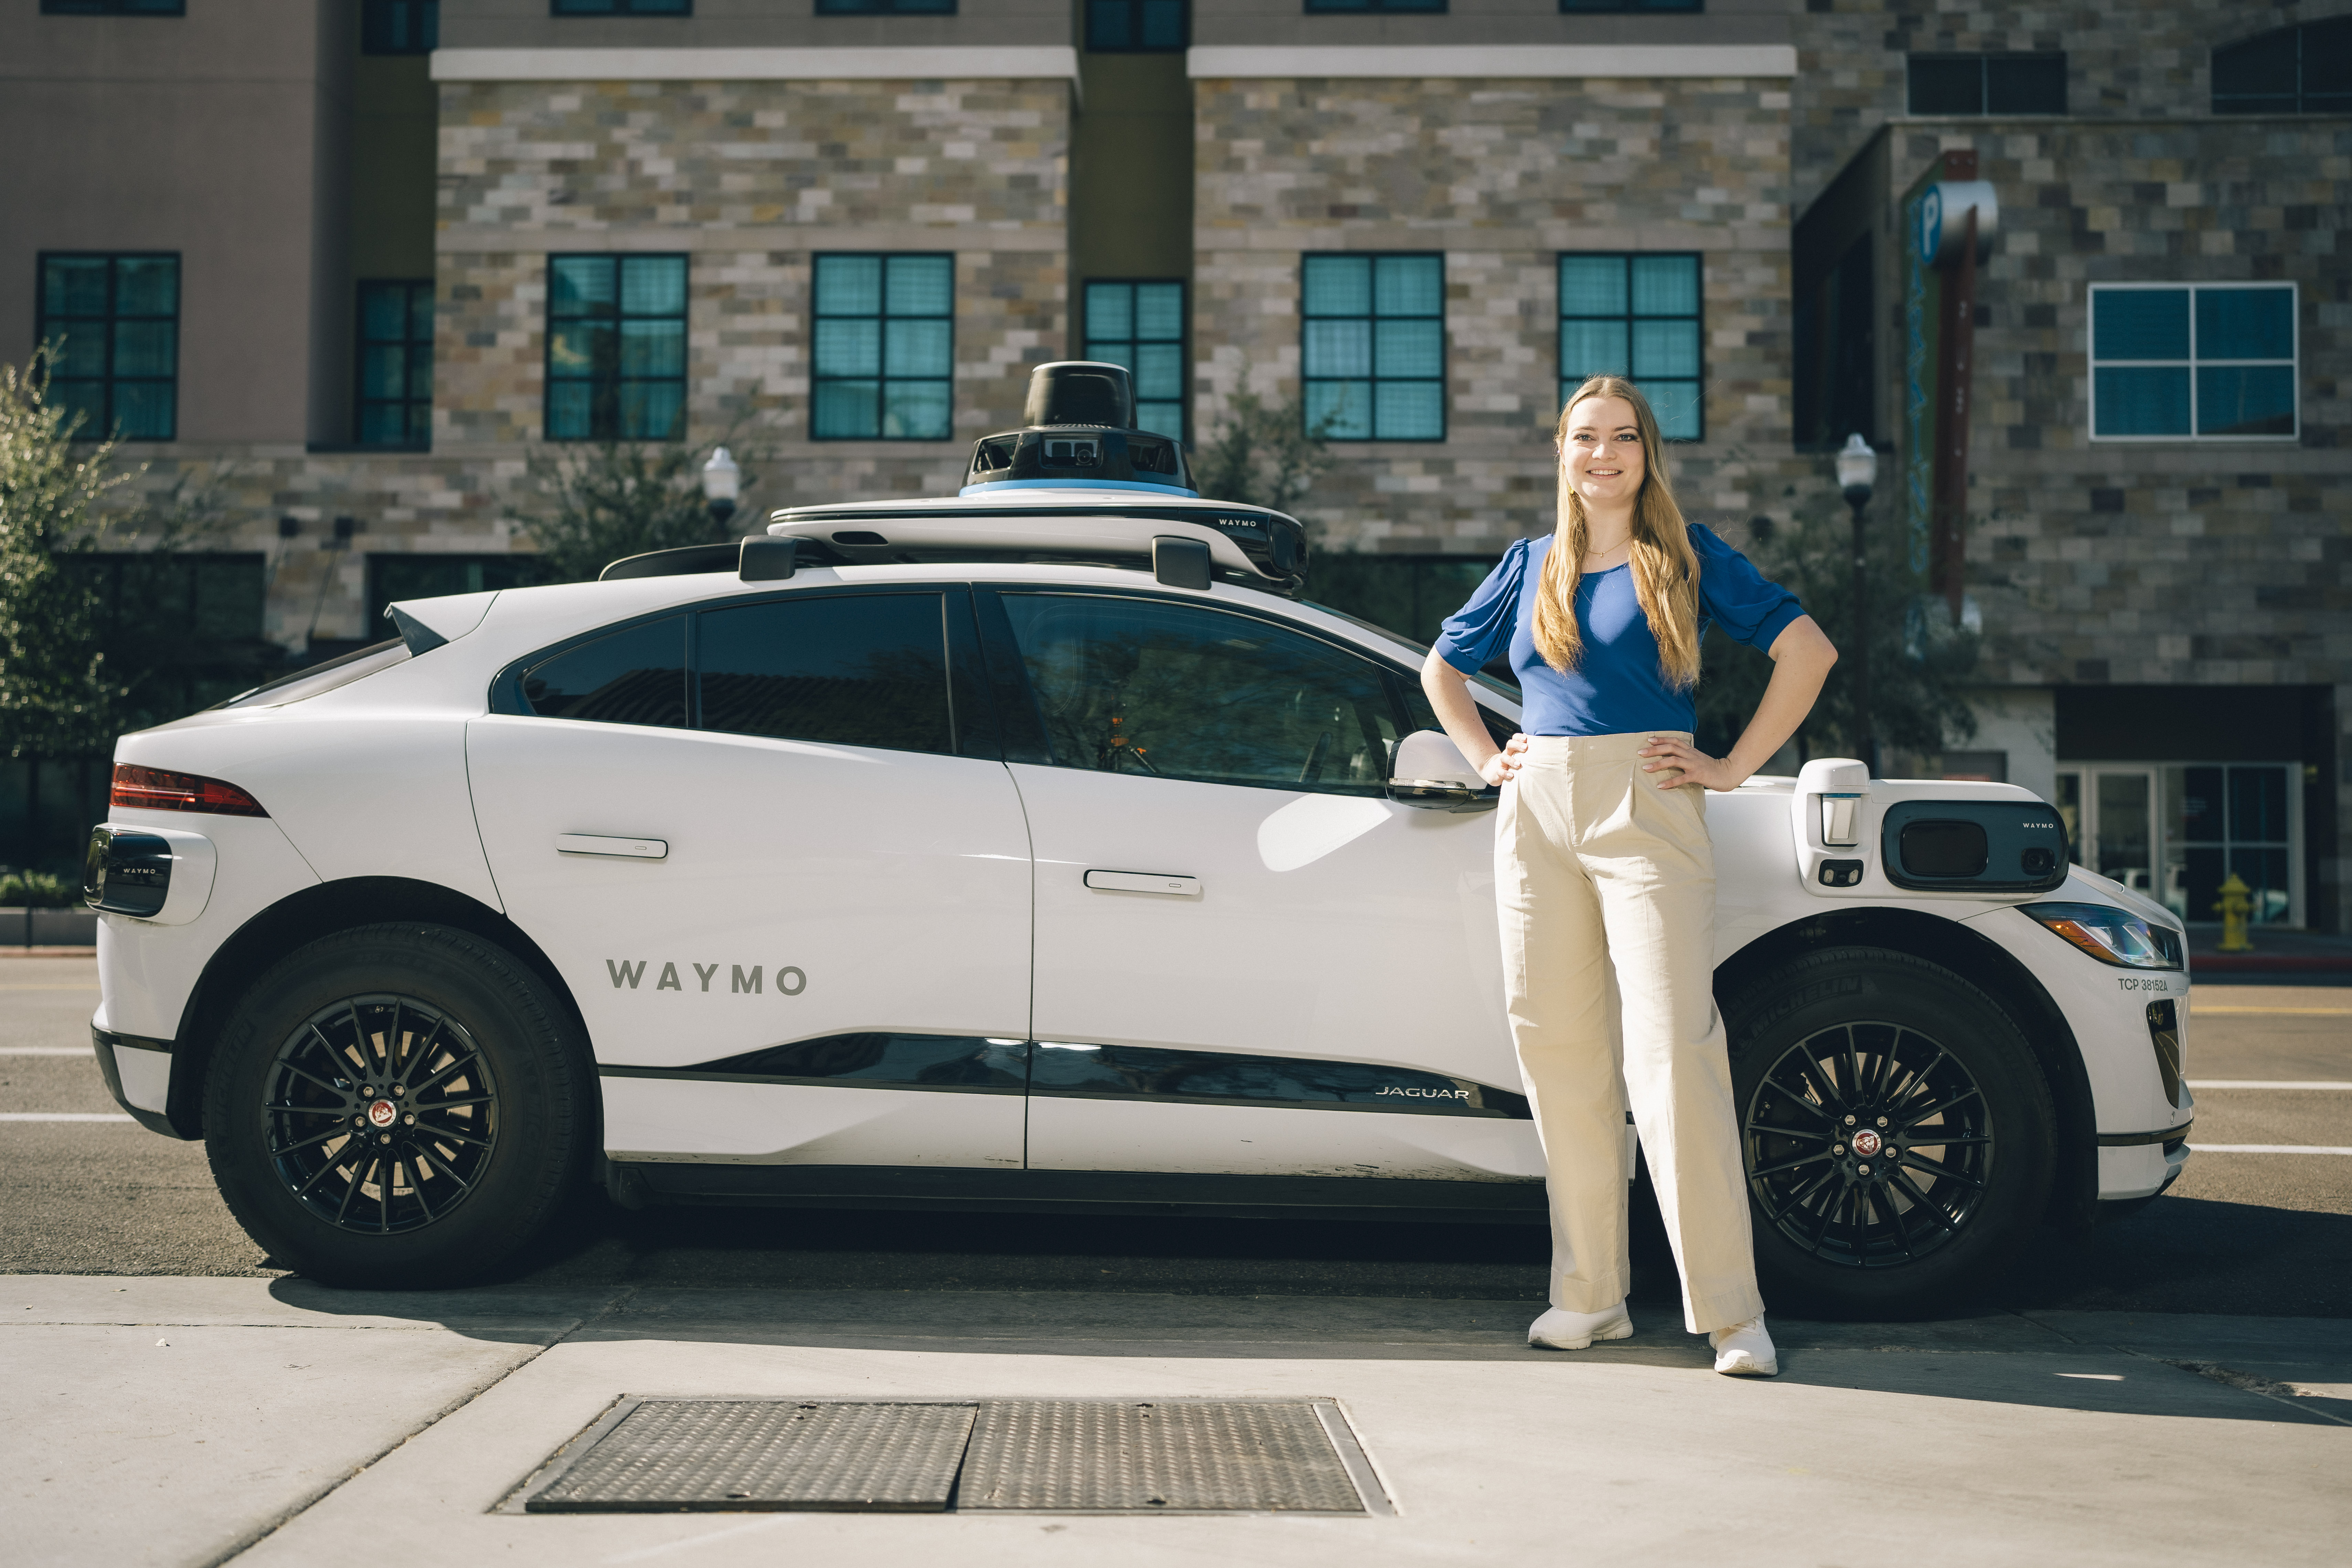 Anne Dorsey standing on the sidewalk, posing in front of a Waymo vehicle